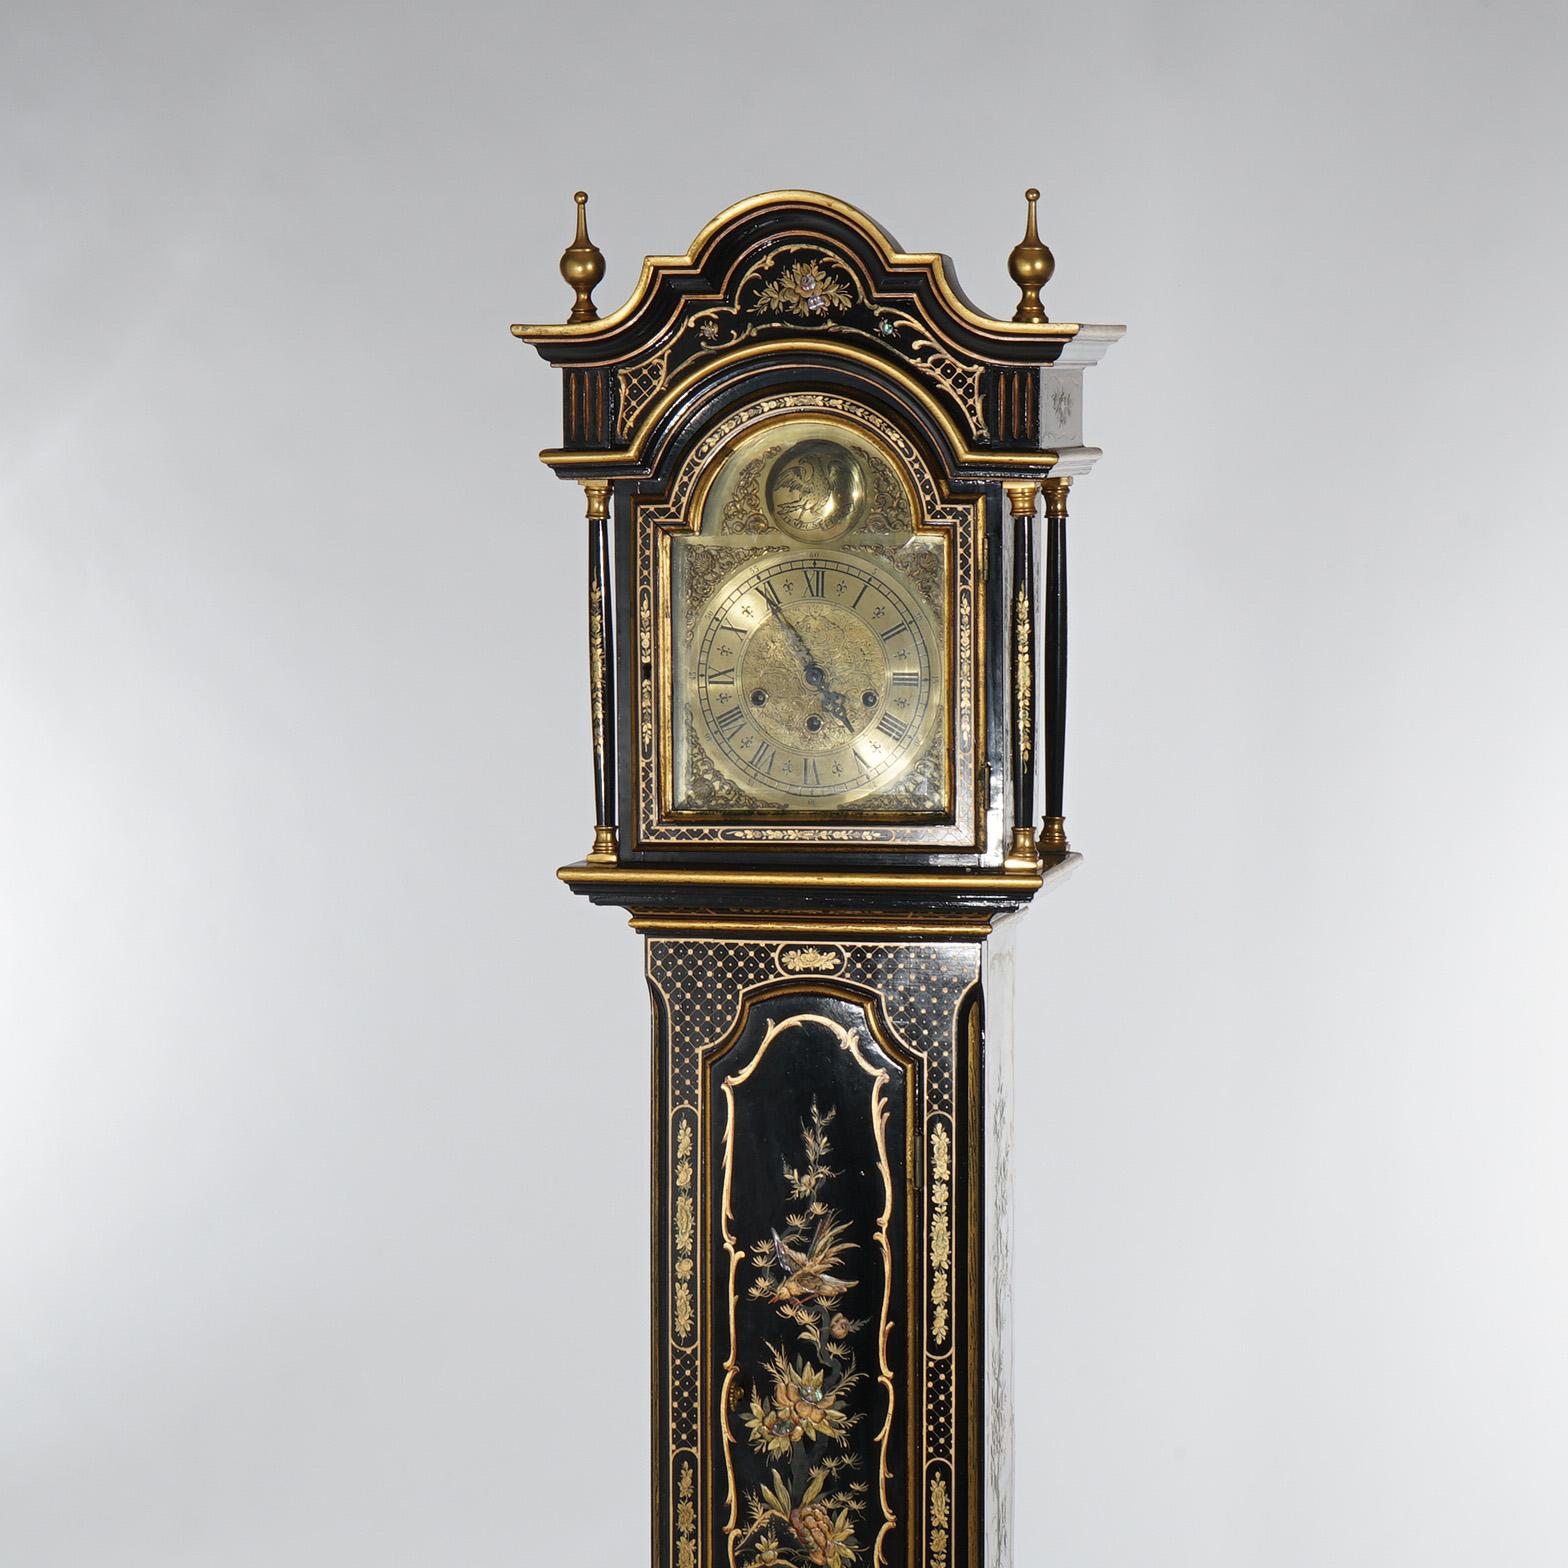 20th Century German Chinoiserie Gilt Decorated Black Lacquer Petite Tall Case Clock 20th C